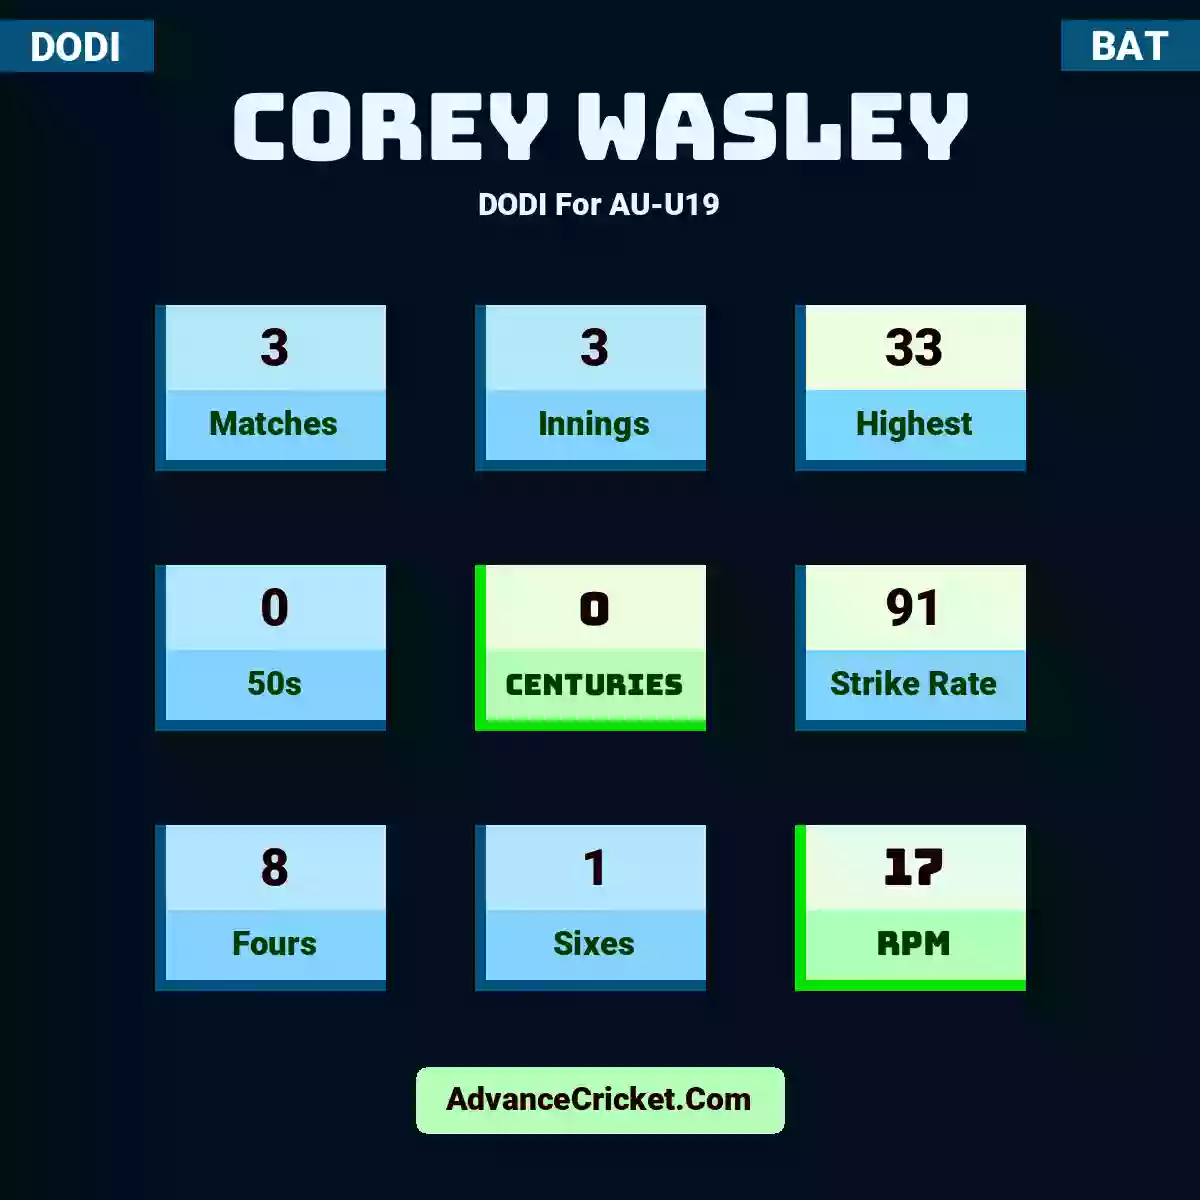 Corey Wasley DODI  For AU-U19, Corey Wasley played 3 matches, scored 33 runs as highest, 0 half-centuries, and 0 centuries, with a strike rate of 91. C.Wasley hit 8 fours and 1 sixes, with an RPM of 17.